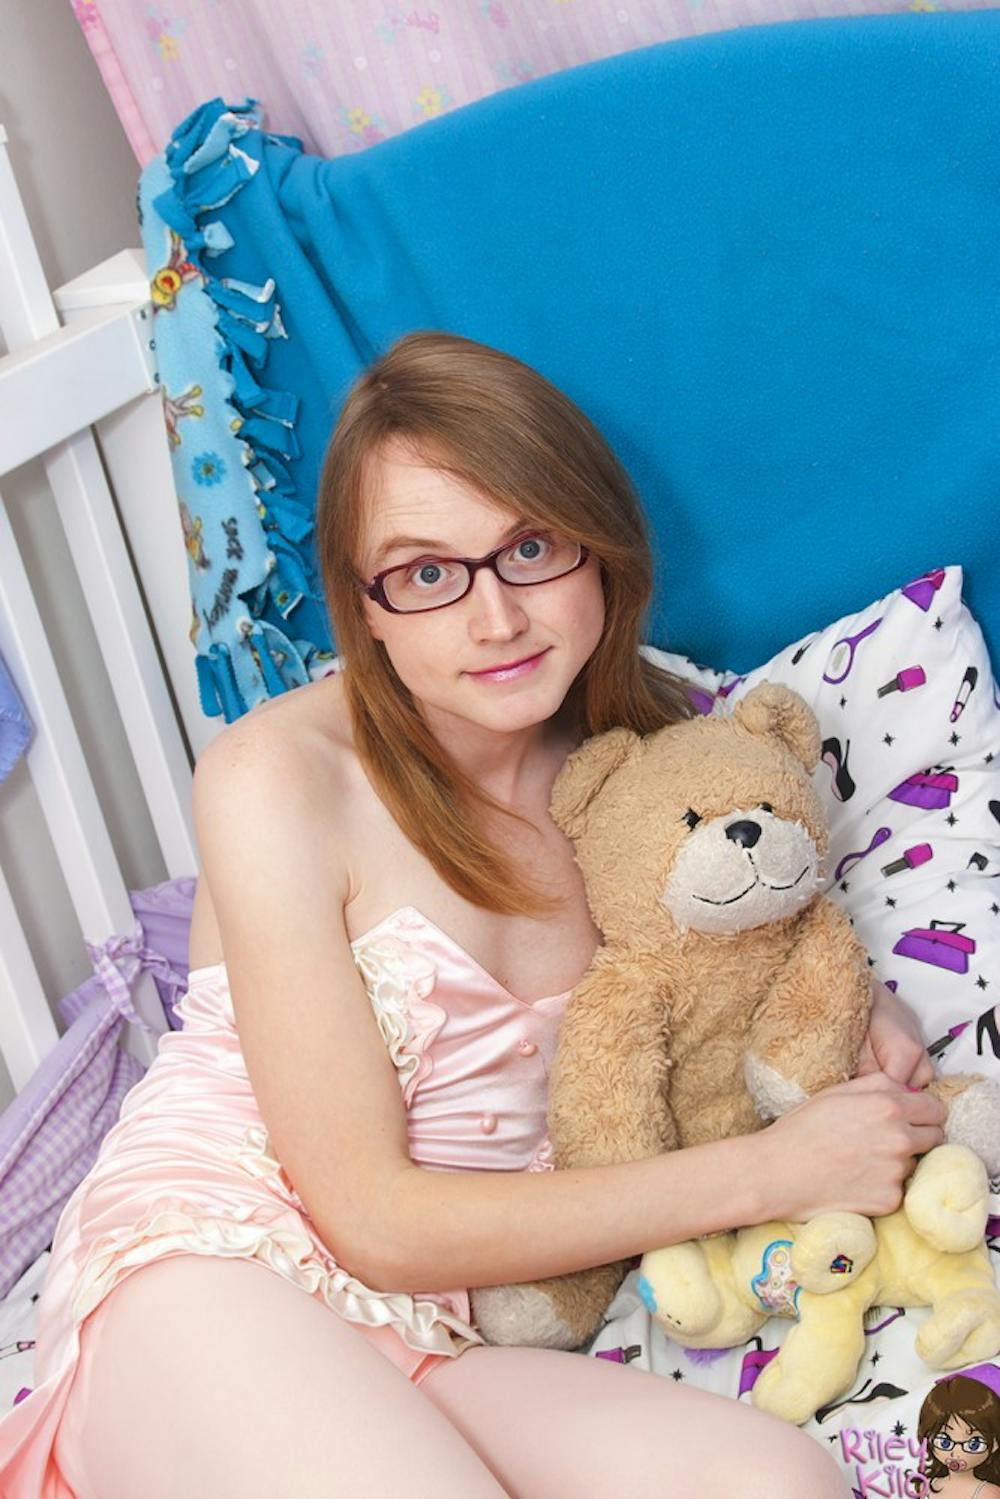 <p>"Adult baby" Riley Kilo, who once appeared on "My Strange Addiction," poses with a teddy bear.</p>